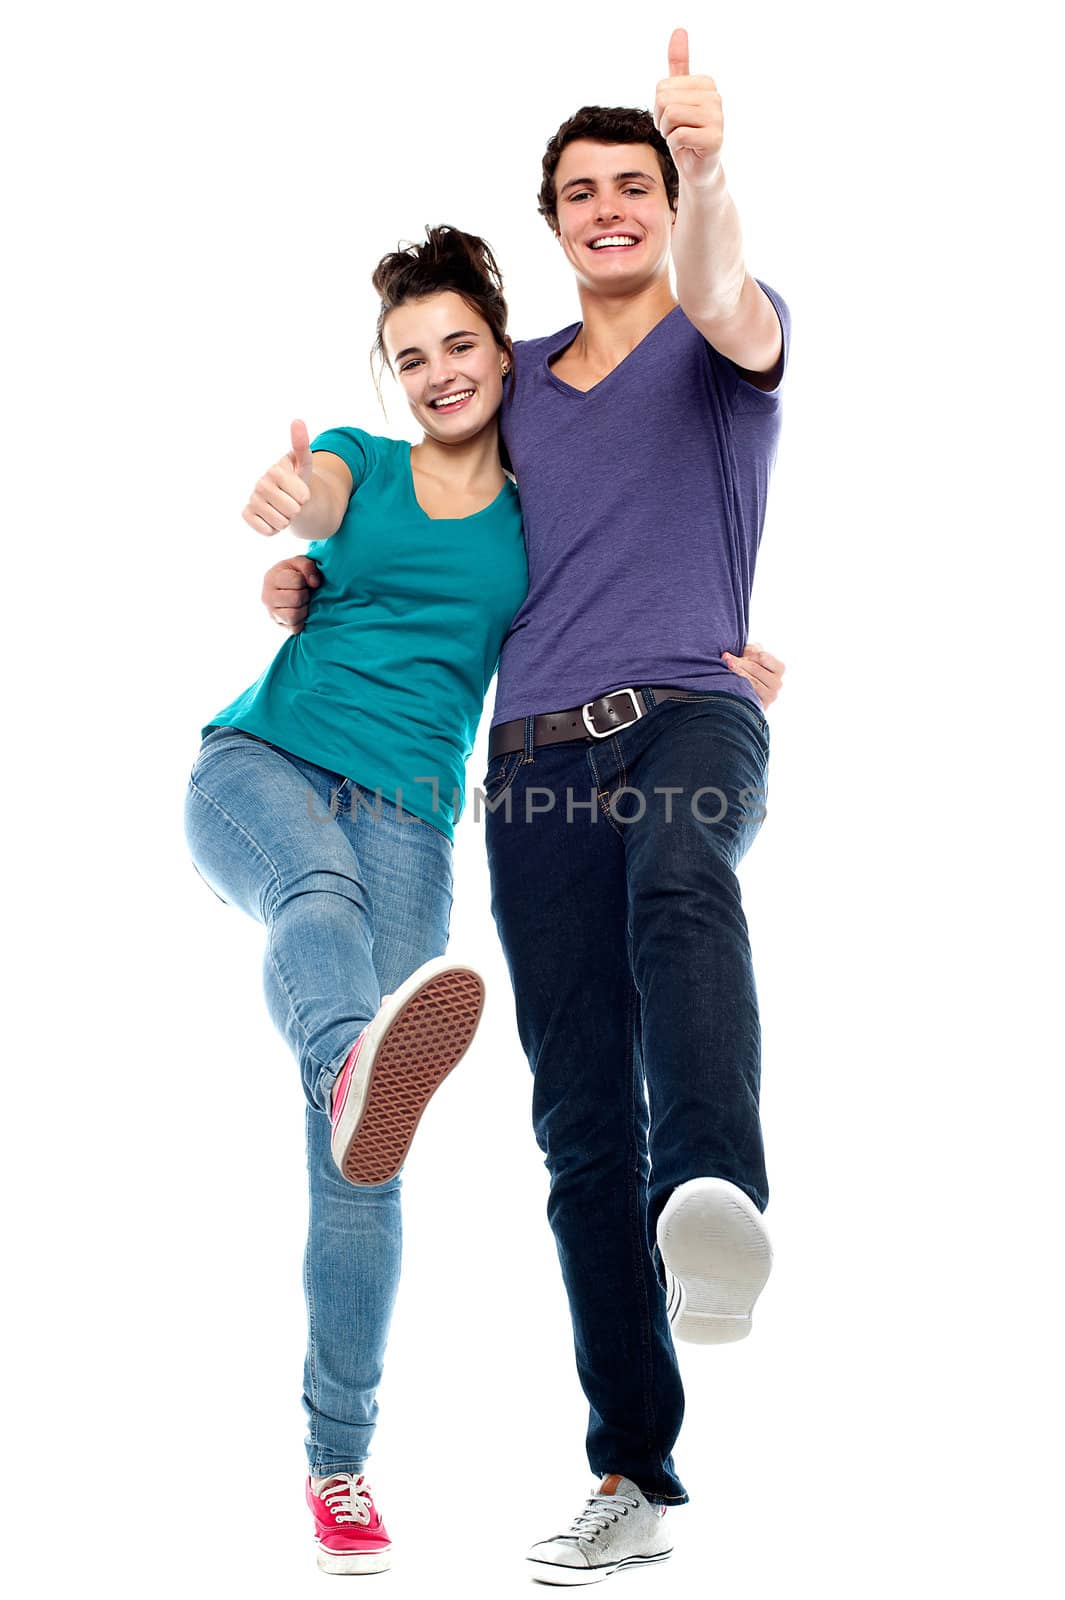 Teen love couple enjoying themselves, gesturing thumbs up. All against white background